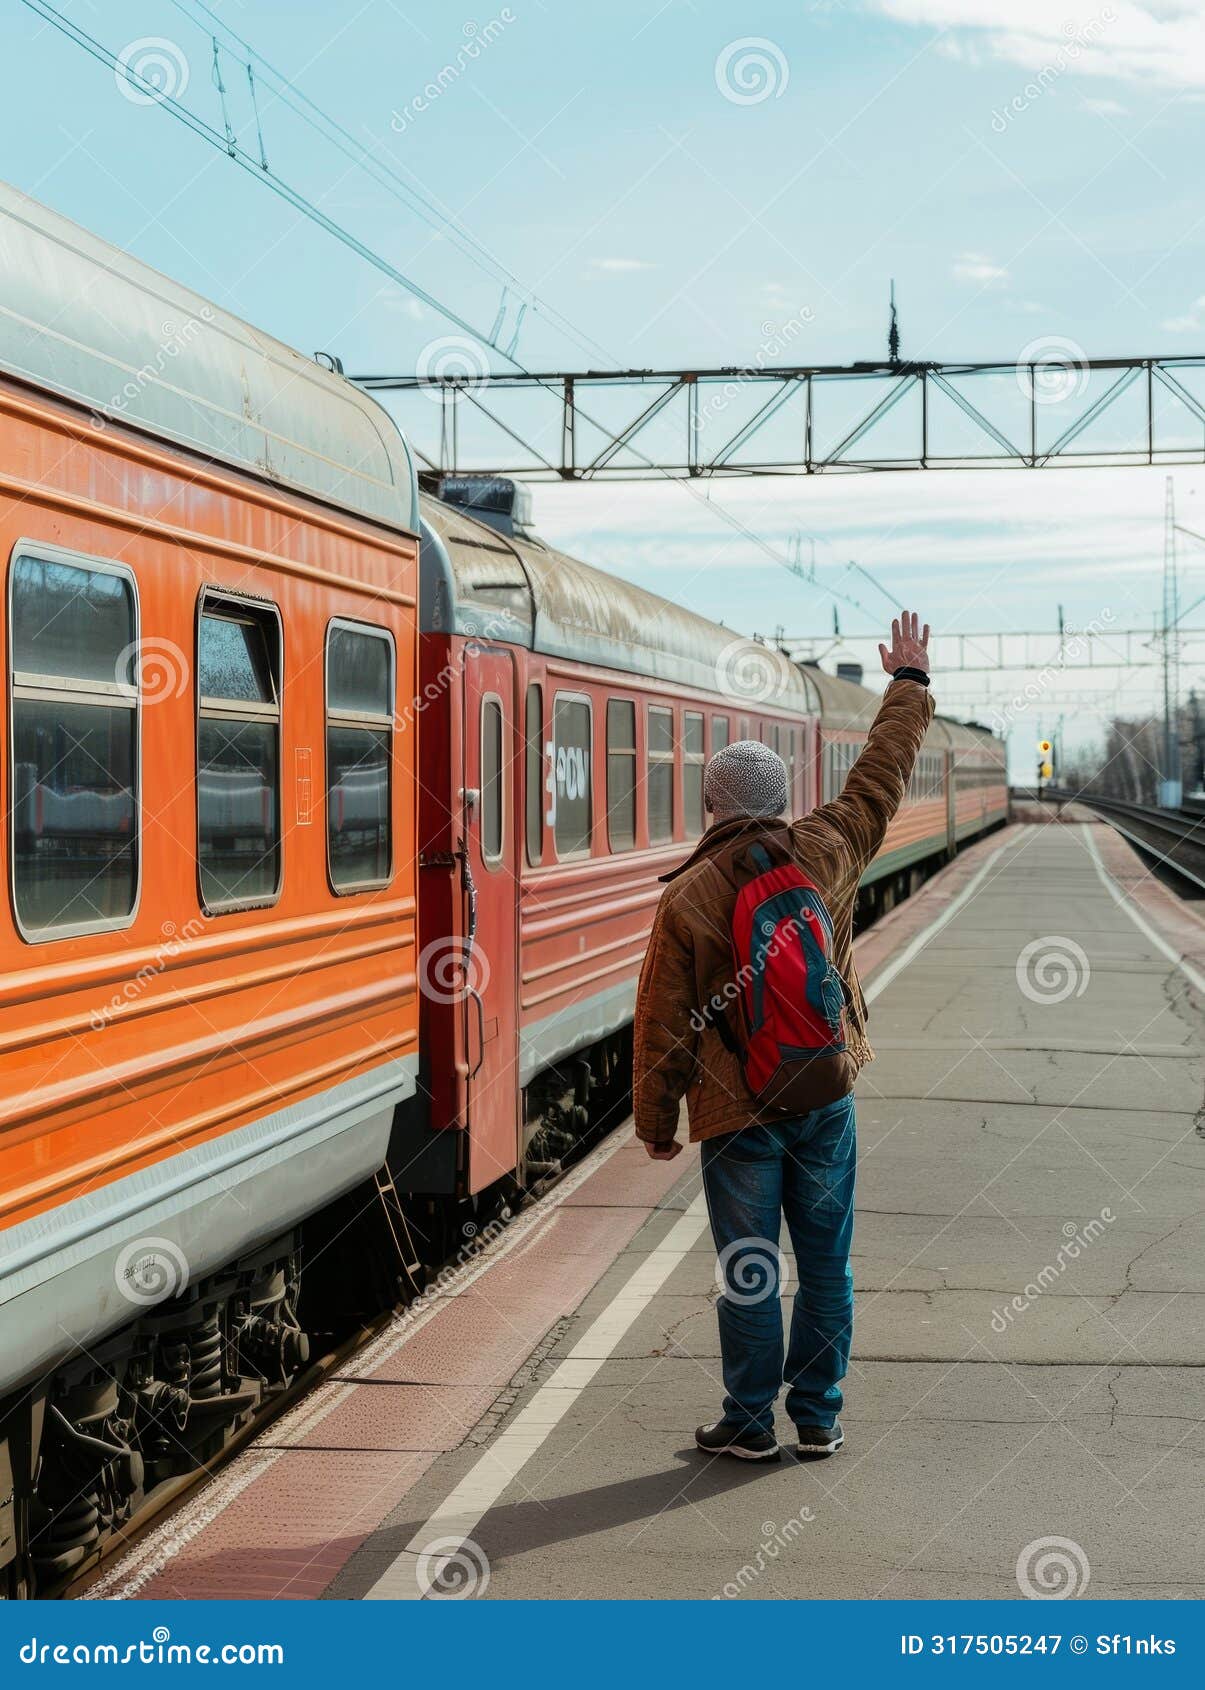 a child bundled up in winter clothing extends a hand high to wave at a departing orange train on a clear day.